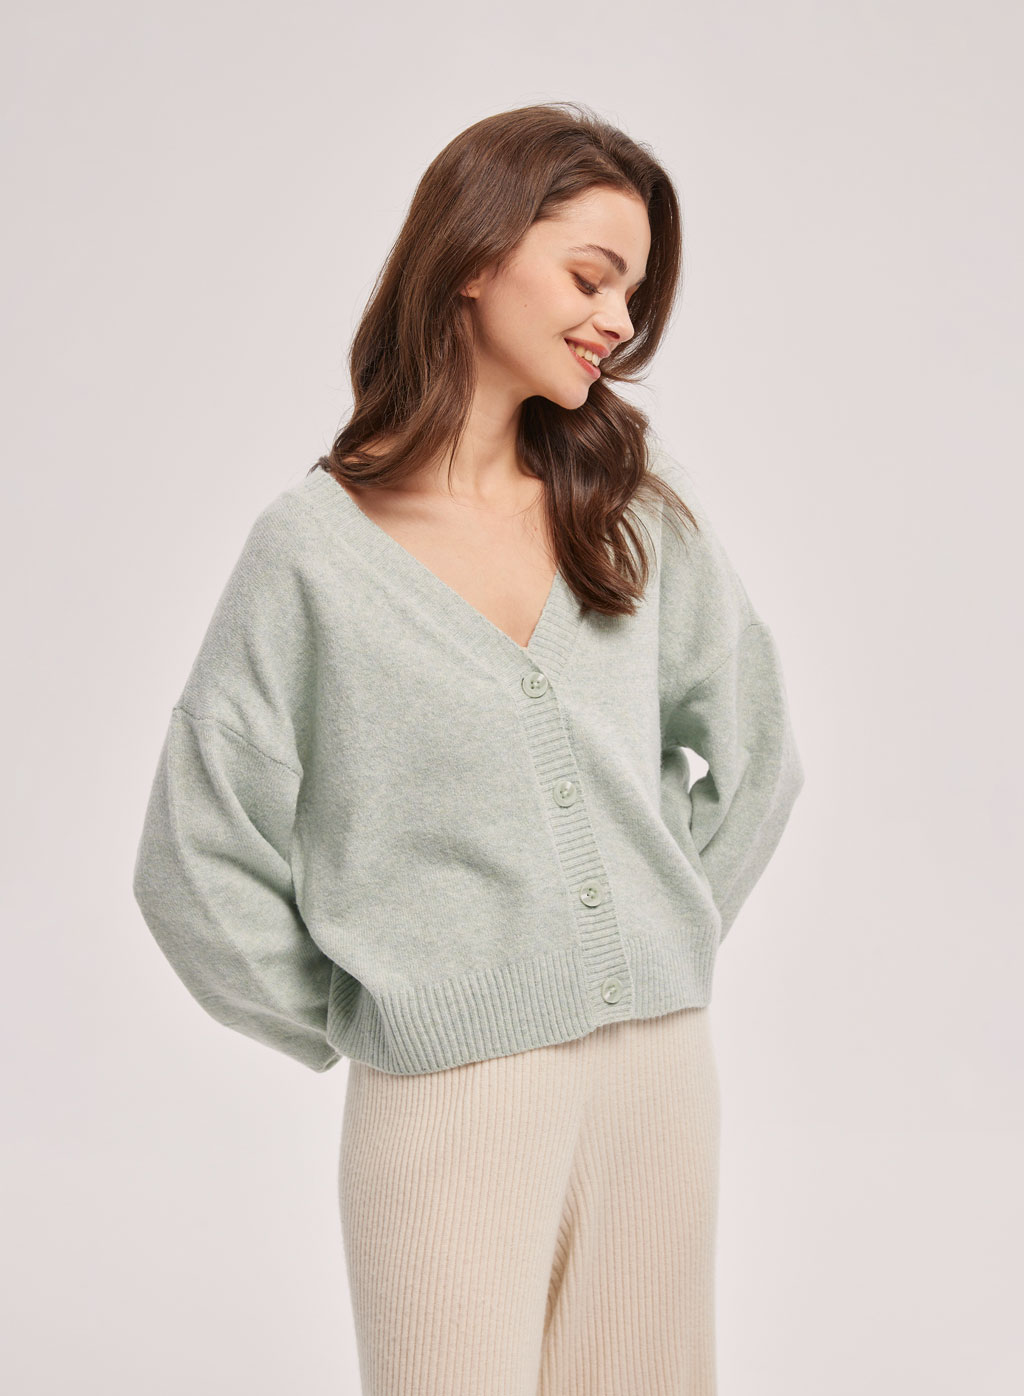 Buttoned Crop Cardigan $30  (50% off)